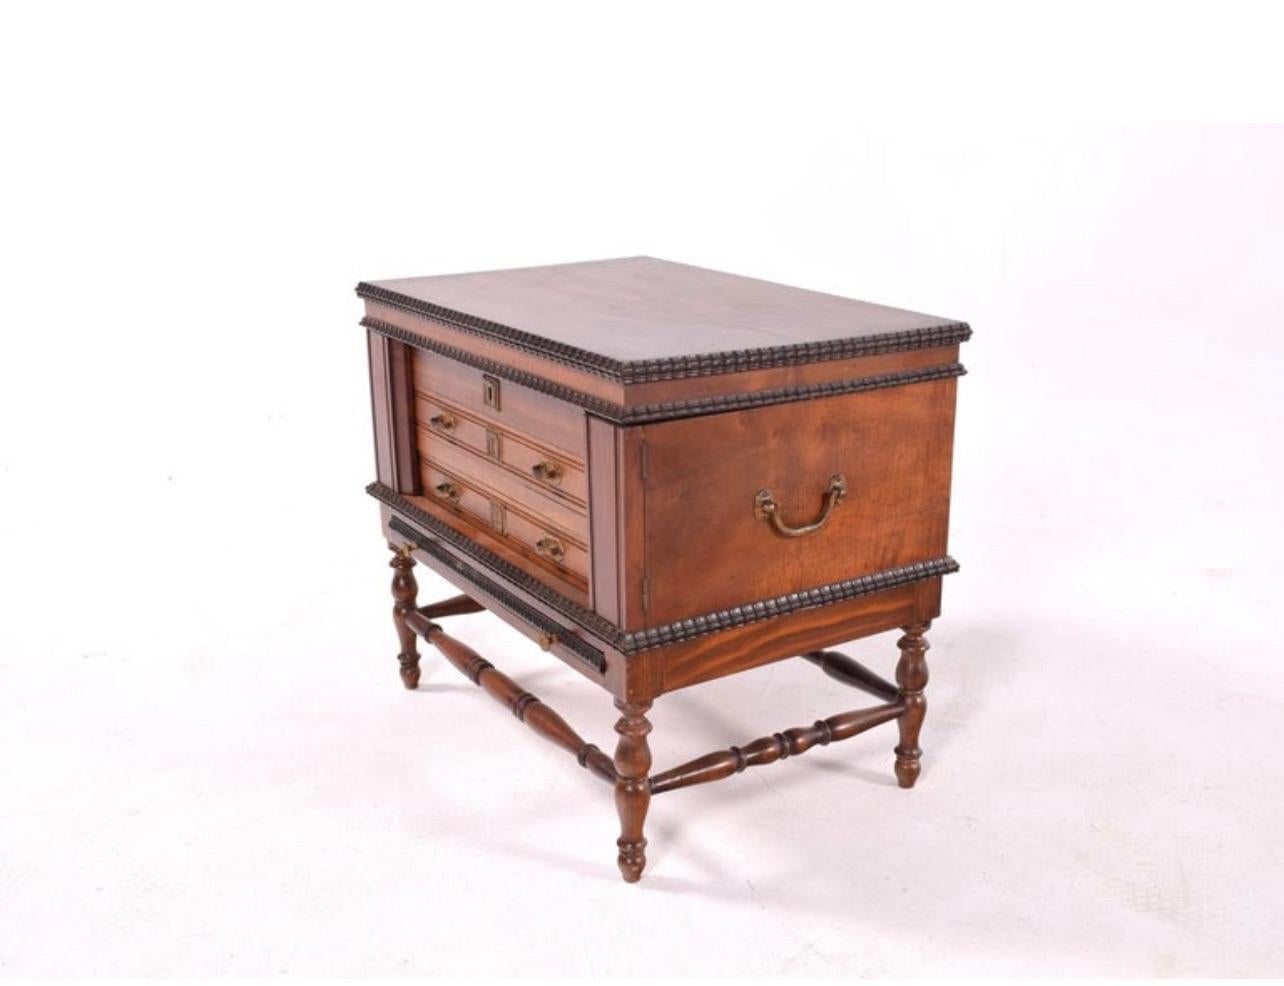 17th century Portuguese cutlery chest made in mahogany. The chest sits on finely turned legs connected by stretchers. It has one compartment, 2 drawers and a pullout shelf. It all locks with one key.
 